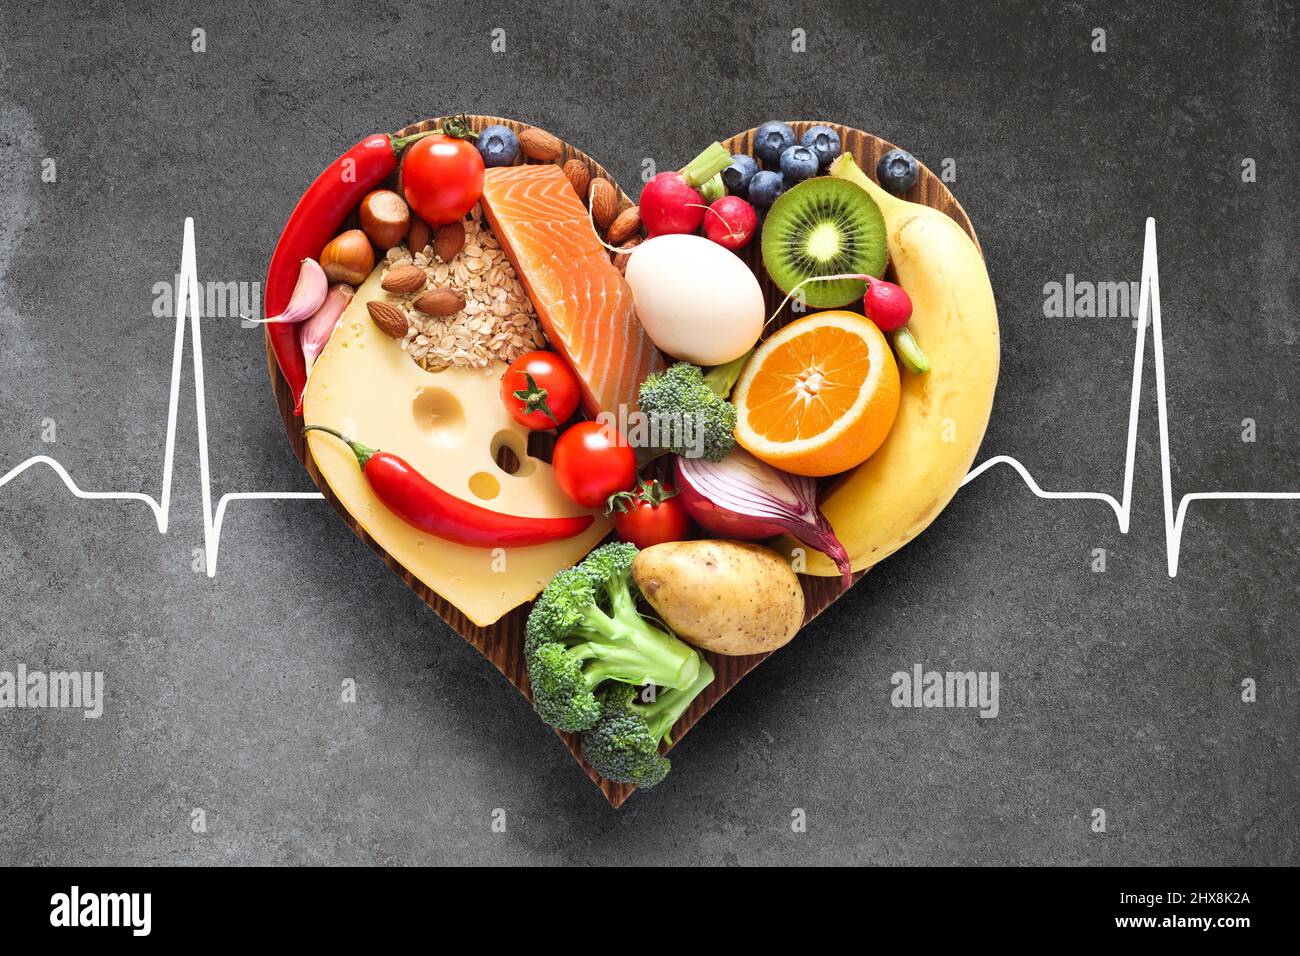 Balanced diet. Healthy food on a heart-shaped wooden cutting board. Stock Photo